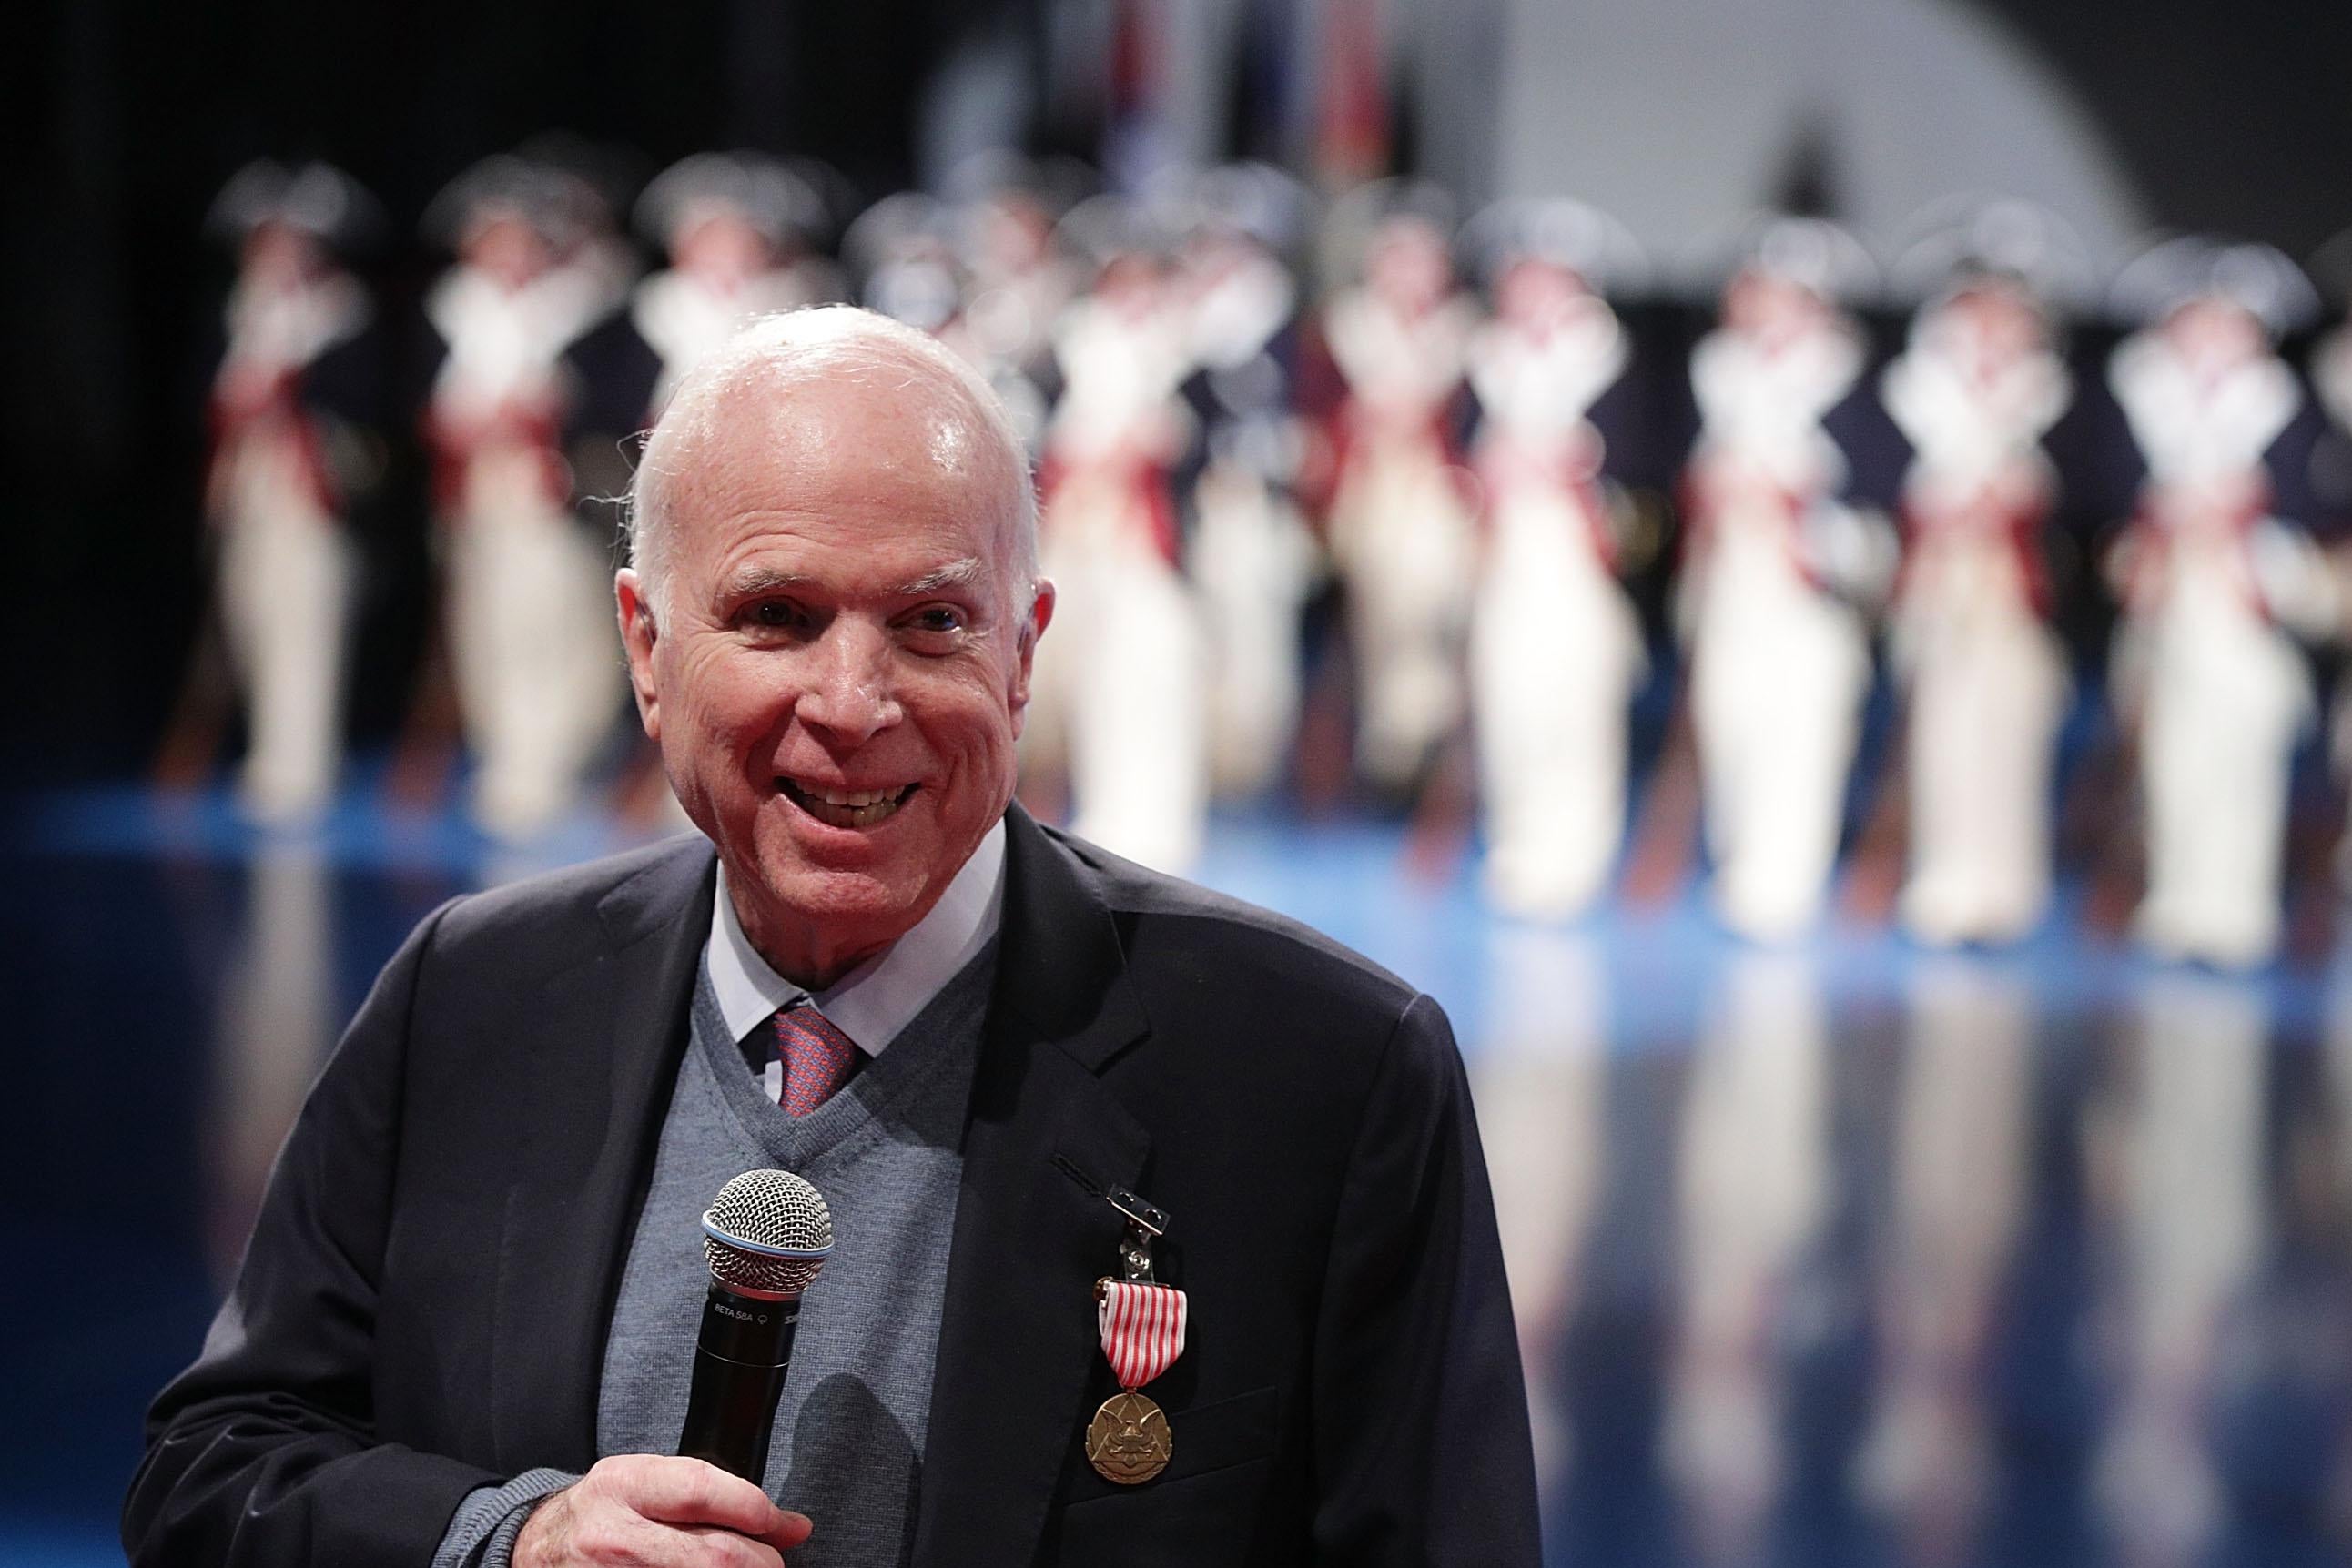 Sen. John McCain (R-AZ) speaks after he was presented with the Outstanding Civilian Service Medal during a special Twilight Tattoo performance November 14, 2017 at Fort Myer in Arlington, Virginia. Sen. McCain was honored for over 63 years of dedicated service to the nation and the U.S. Navy.  